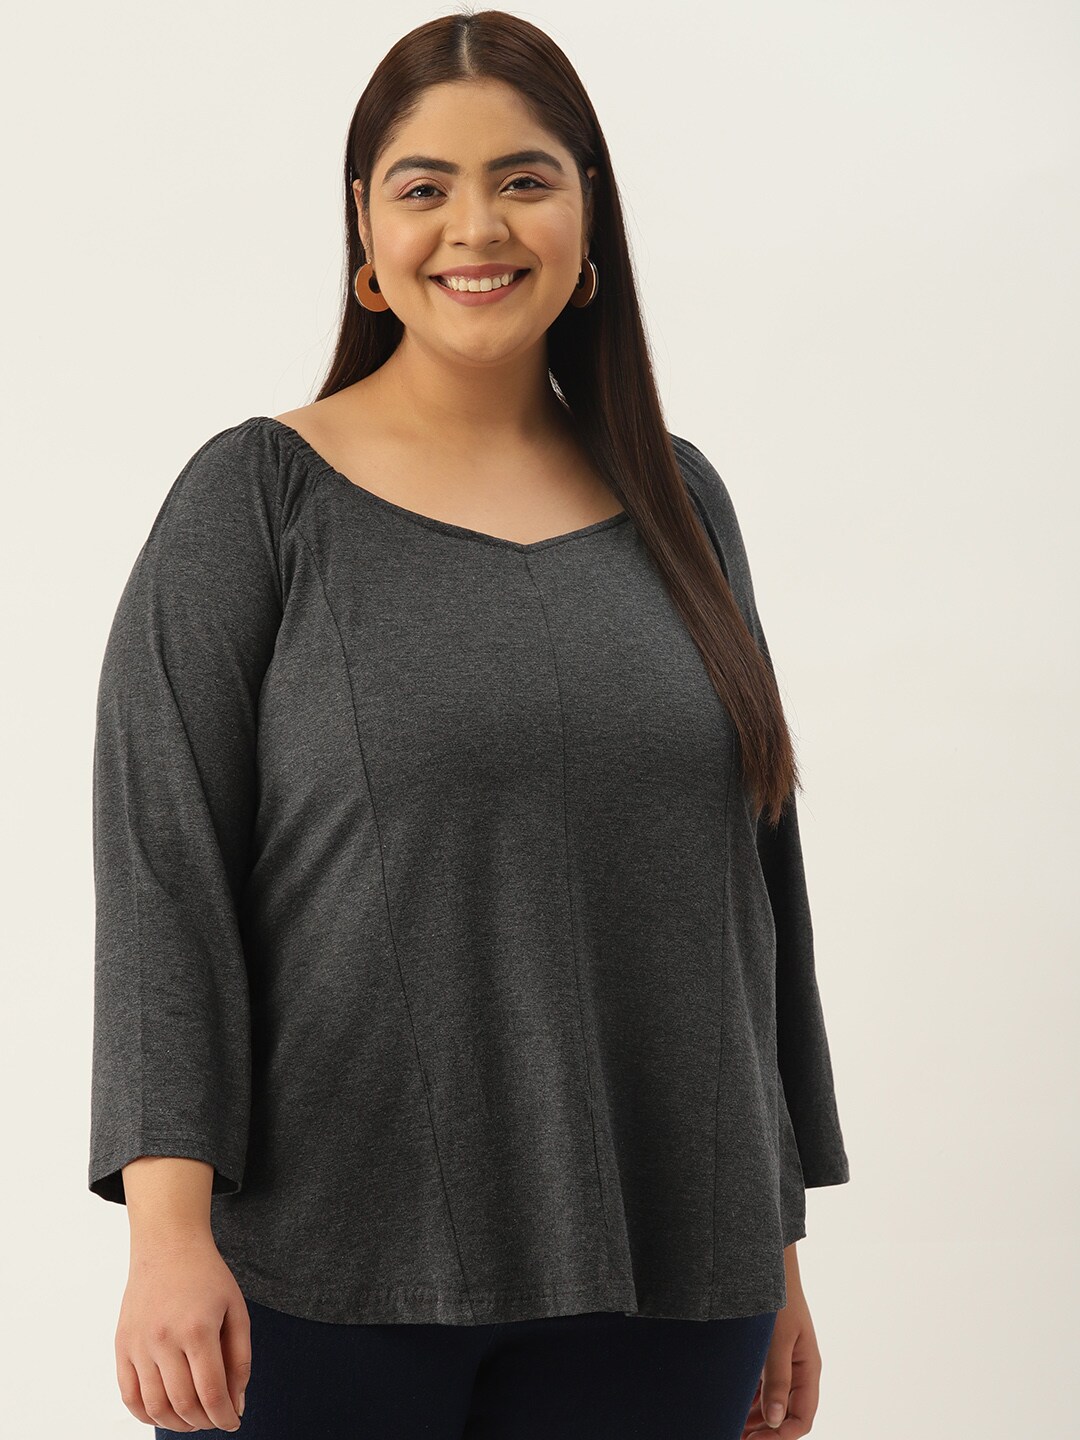 theRebelinme Women Plus Size Sweetheart Neck Top Price in India